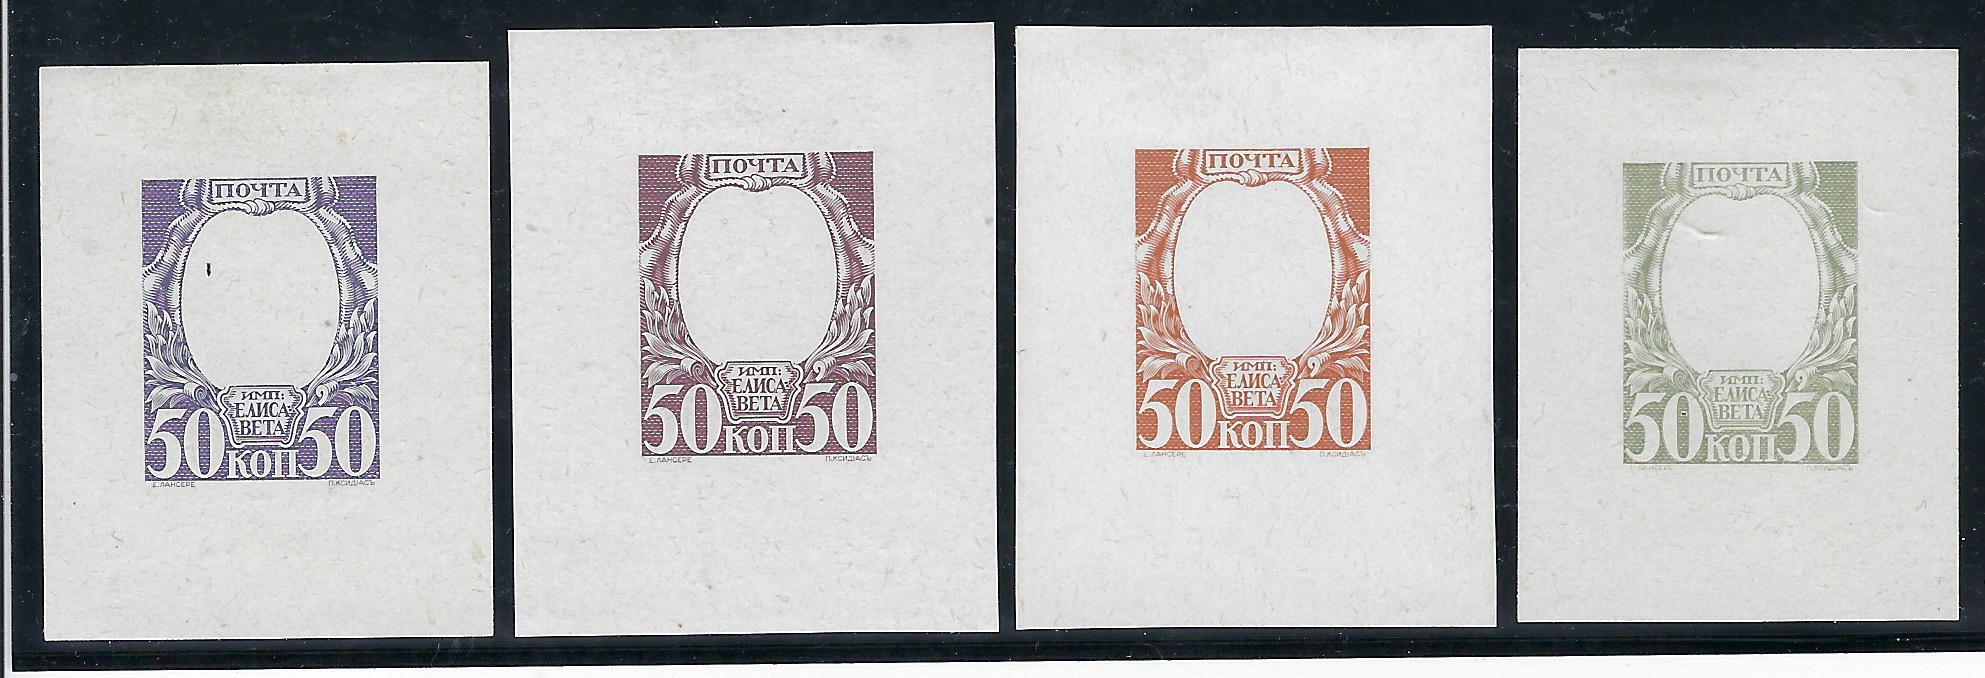 Russia 1913 Romanov Tercentenary 50k frame only die proofs in grey-purple, bistre, brown and grey-green, with the names of designer and engraver beneath the picture, some small thin. Possibly from Tsar collection at Robson Lowe 1935, published in the Yamschik-Post Rider 1983, No 12, page 15.